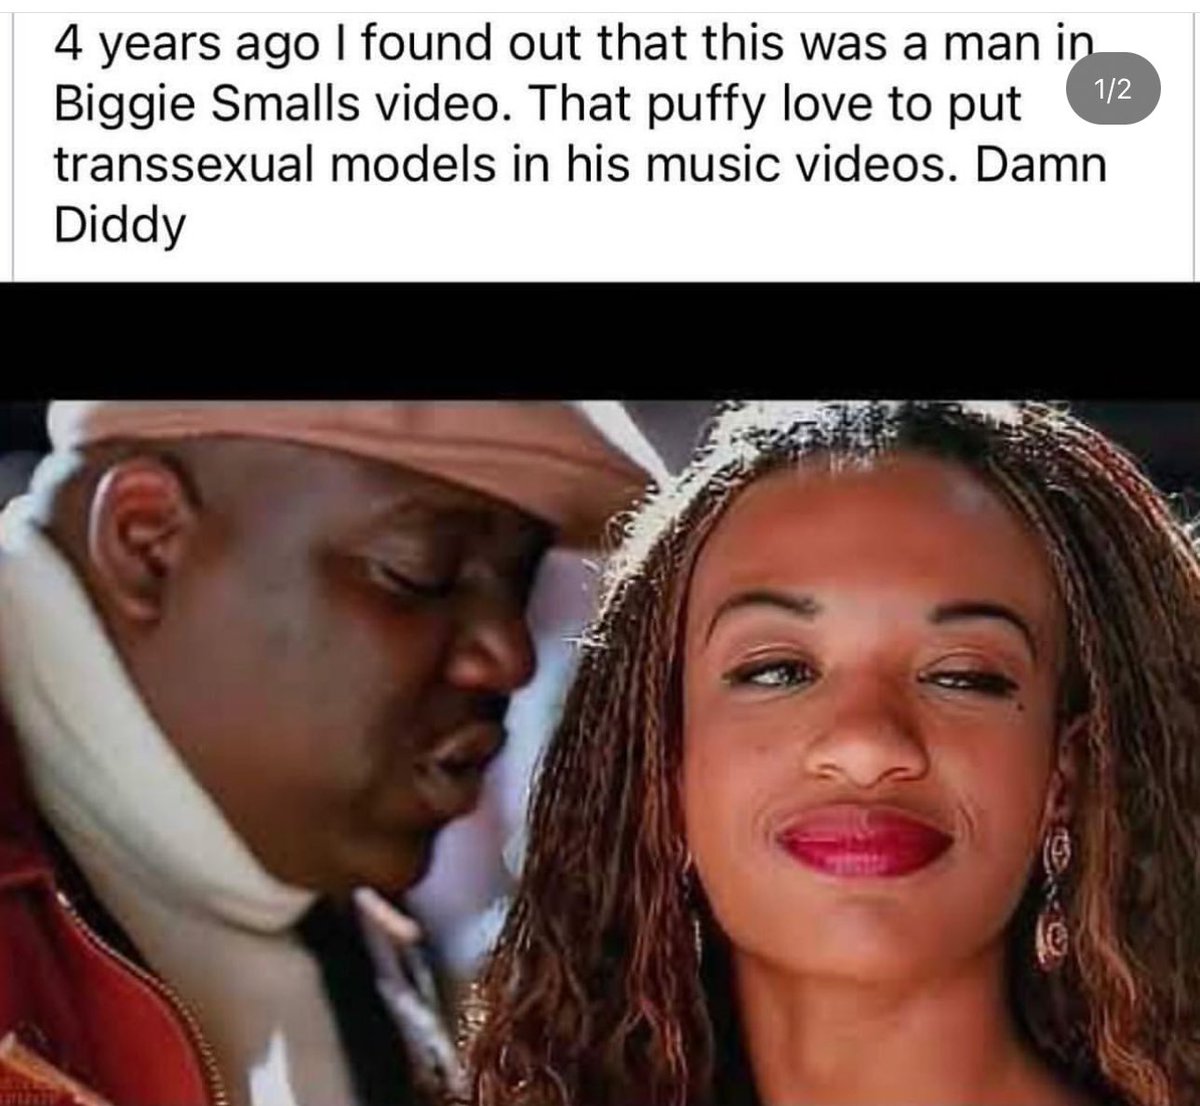 I wonder if this actually true… I wouldn’t put nothing past Diddy at this point.